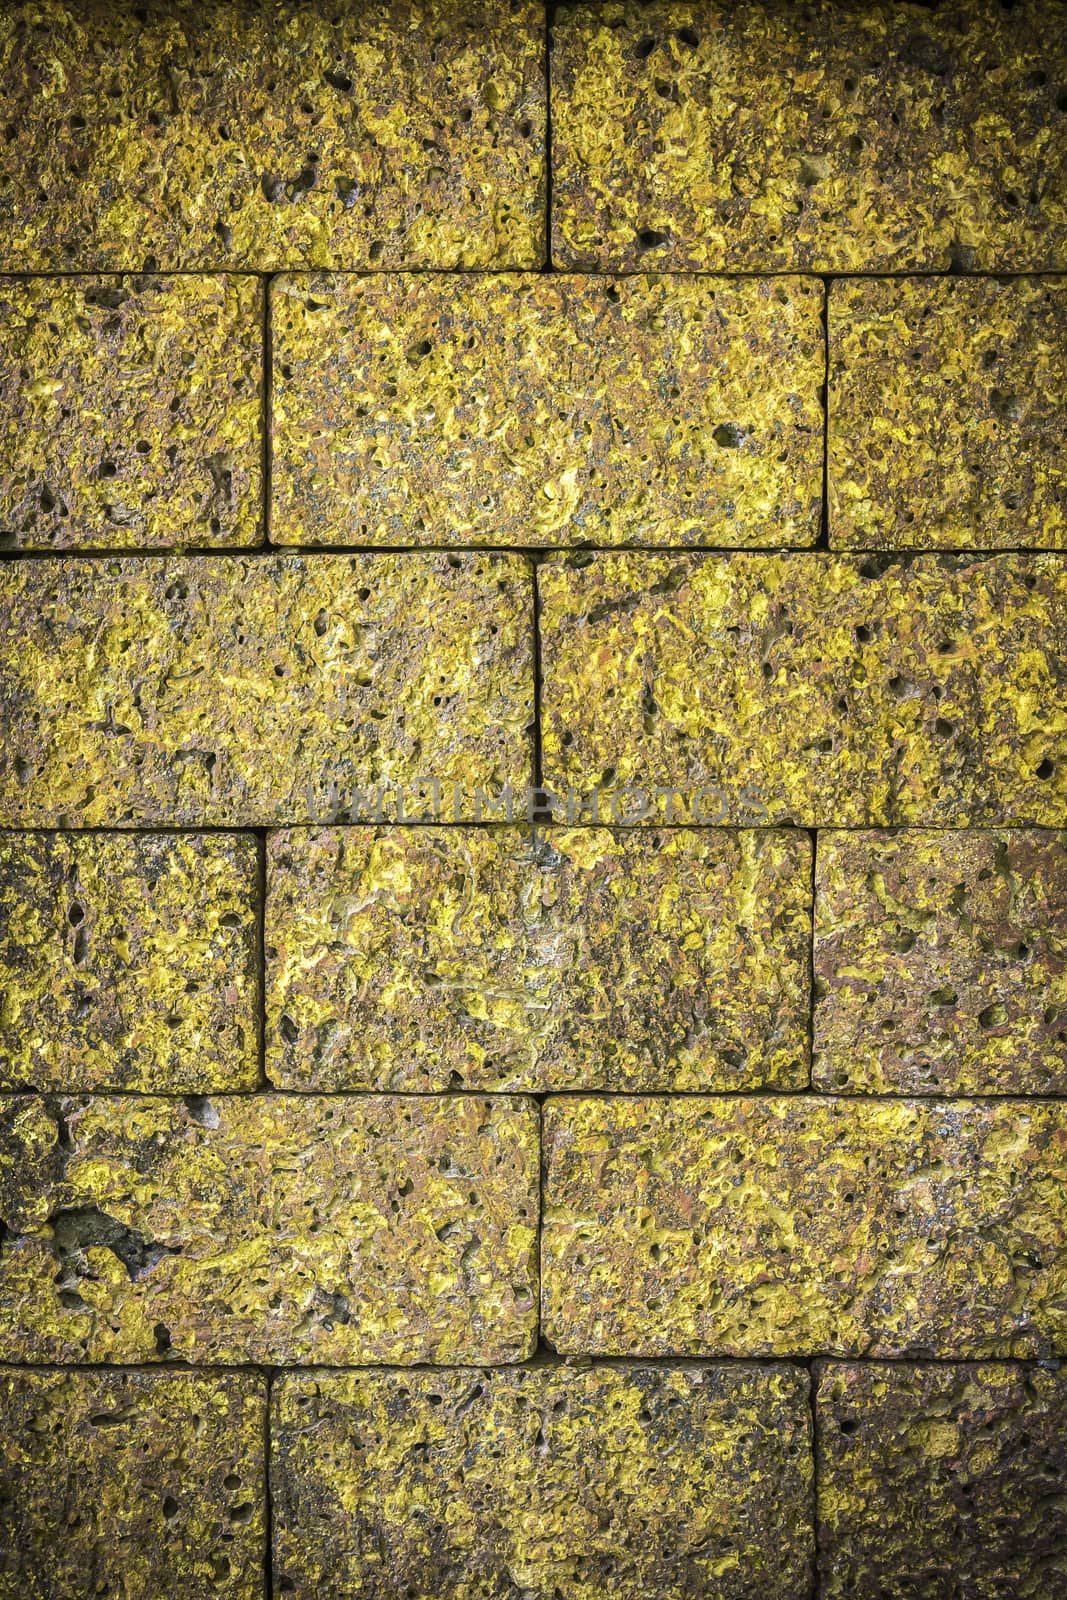 Texture and pattern of laterite stone wall